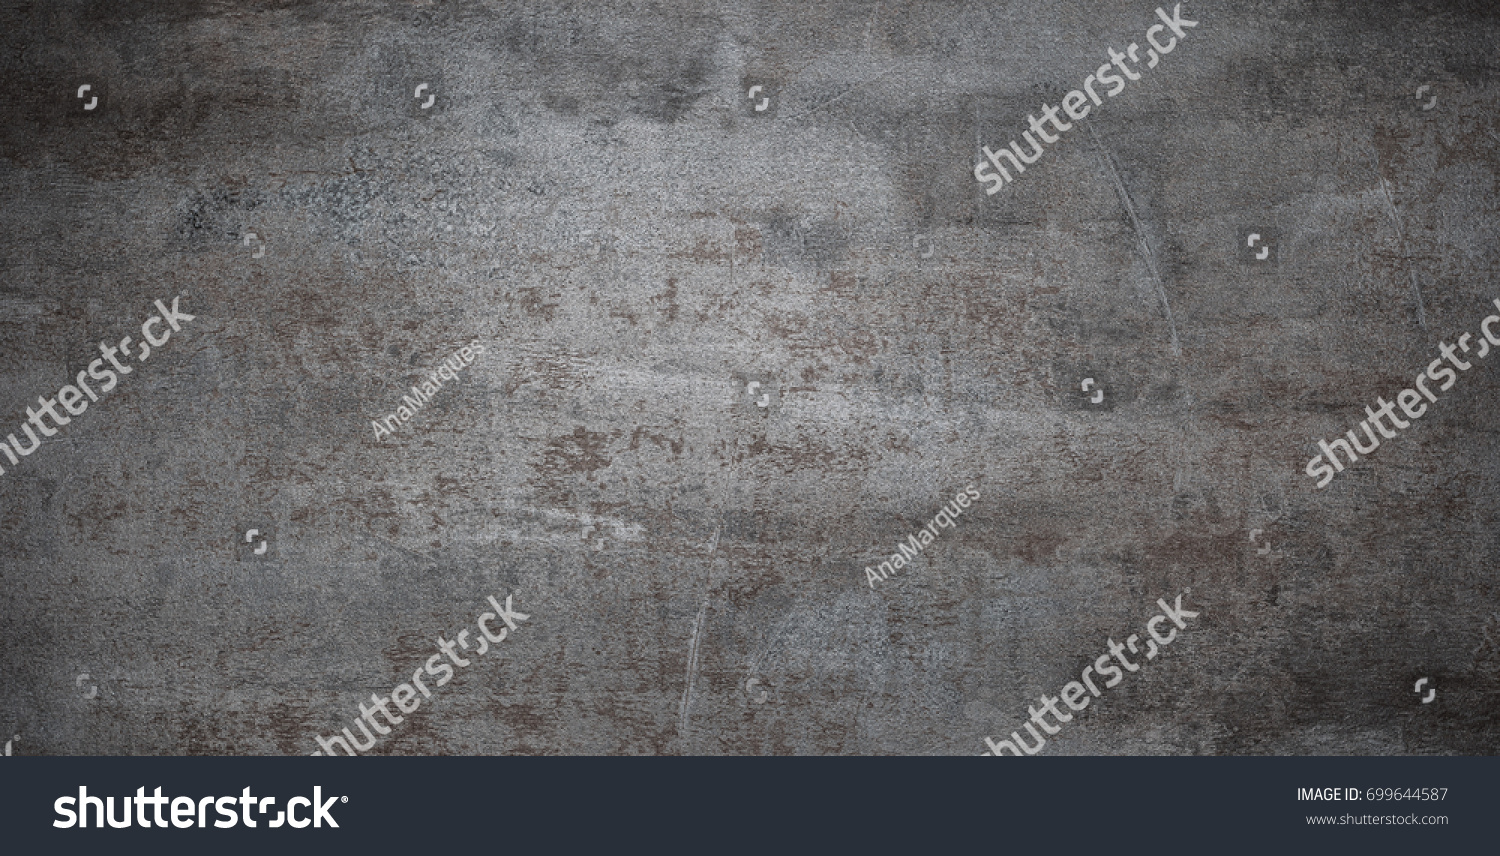 Grunge metal background or texture with scratches and cracks #699644587